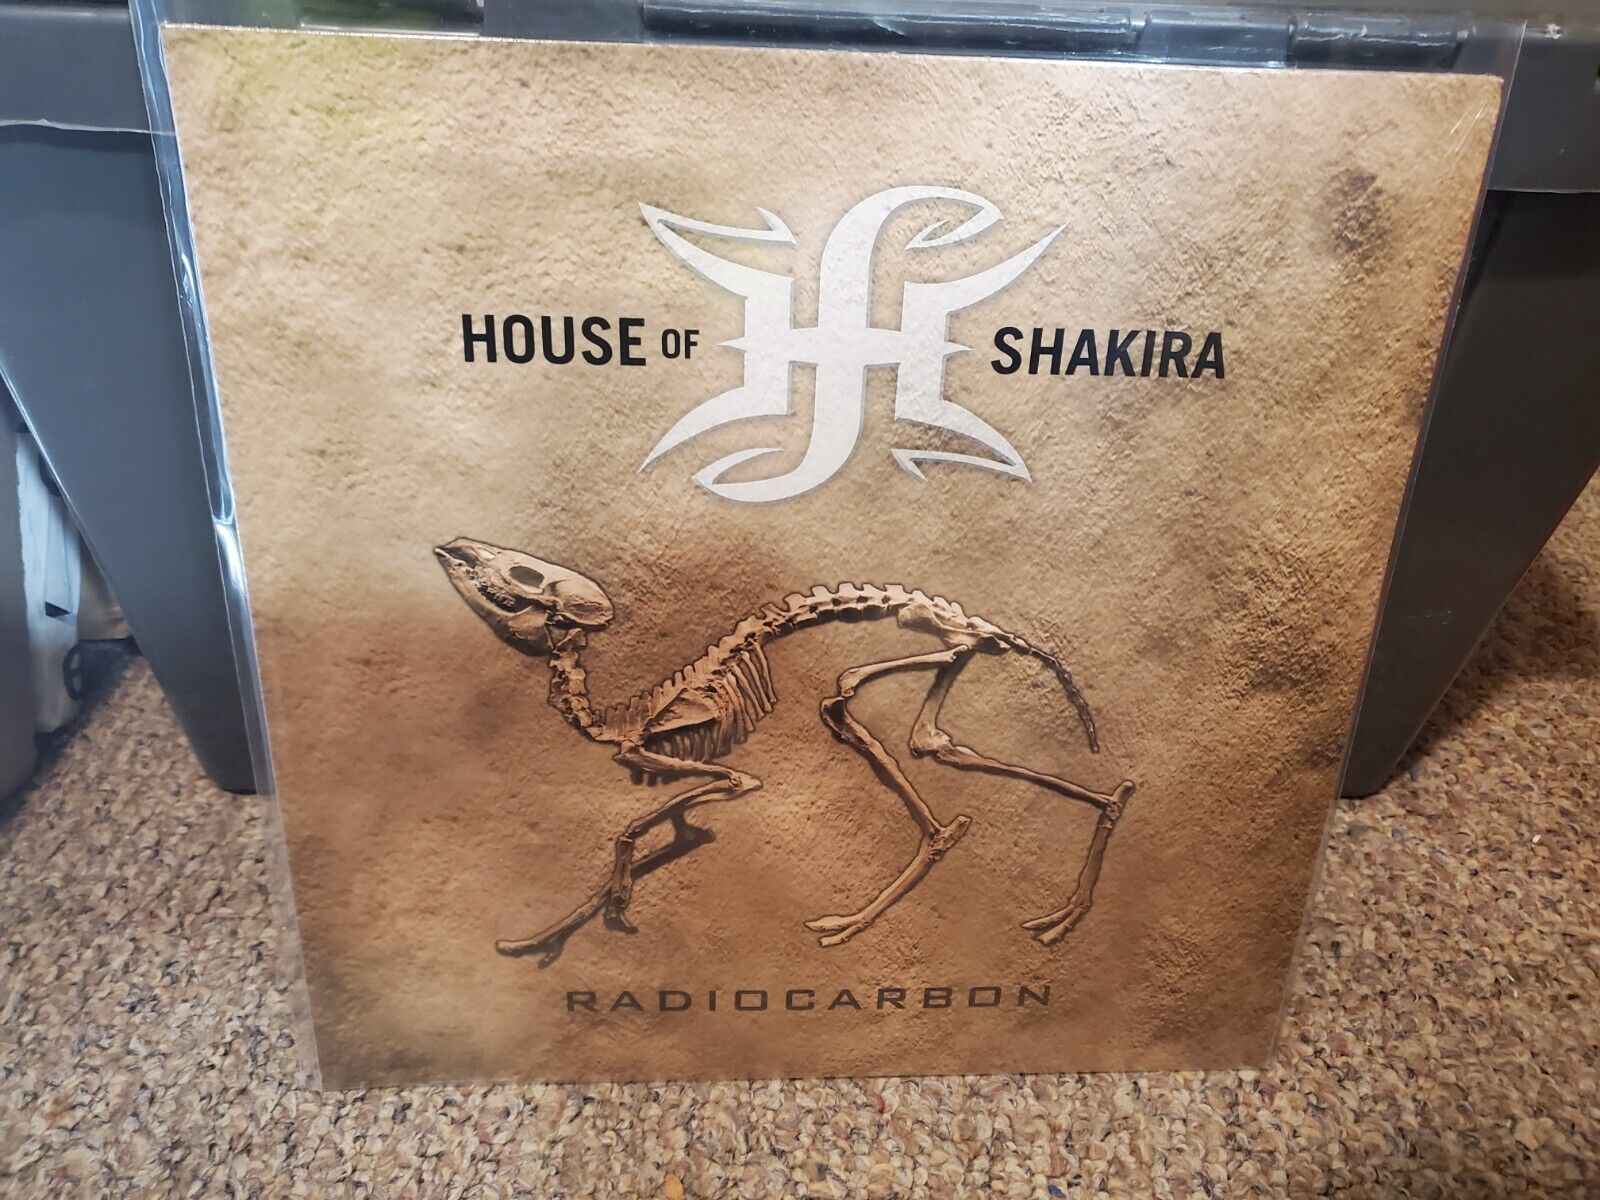 Radiocarbon by House of Shakira (Record, 2019)